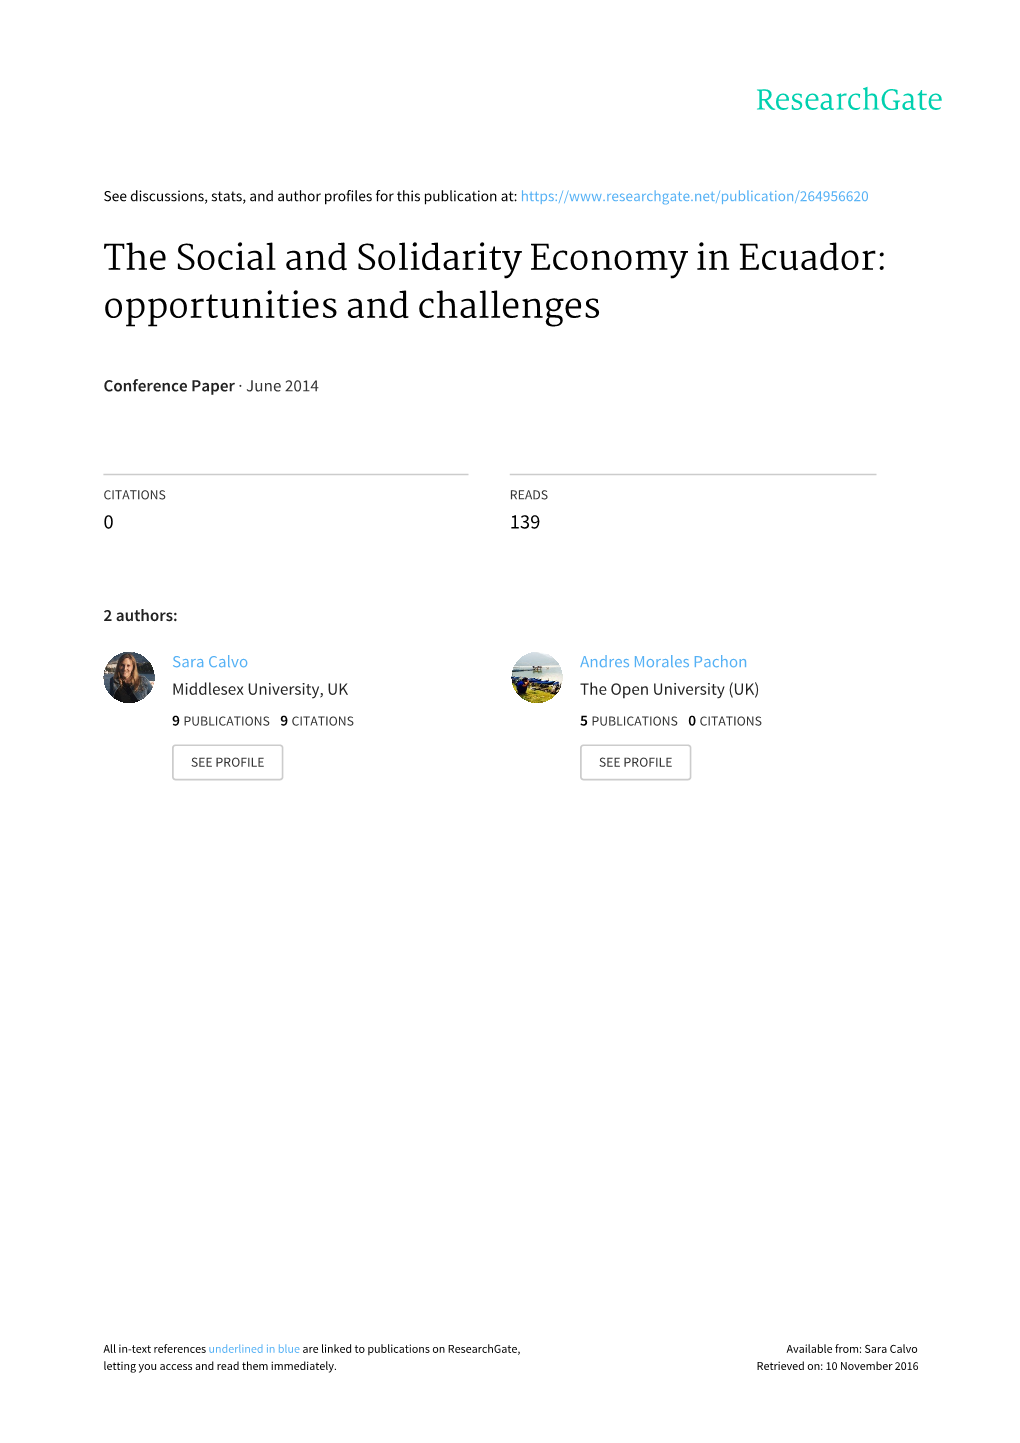 The Social and Solidarity Economy in Ecuador: Opportunities and Challenges